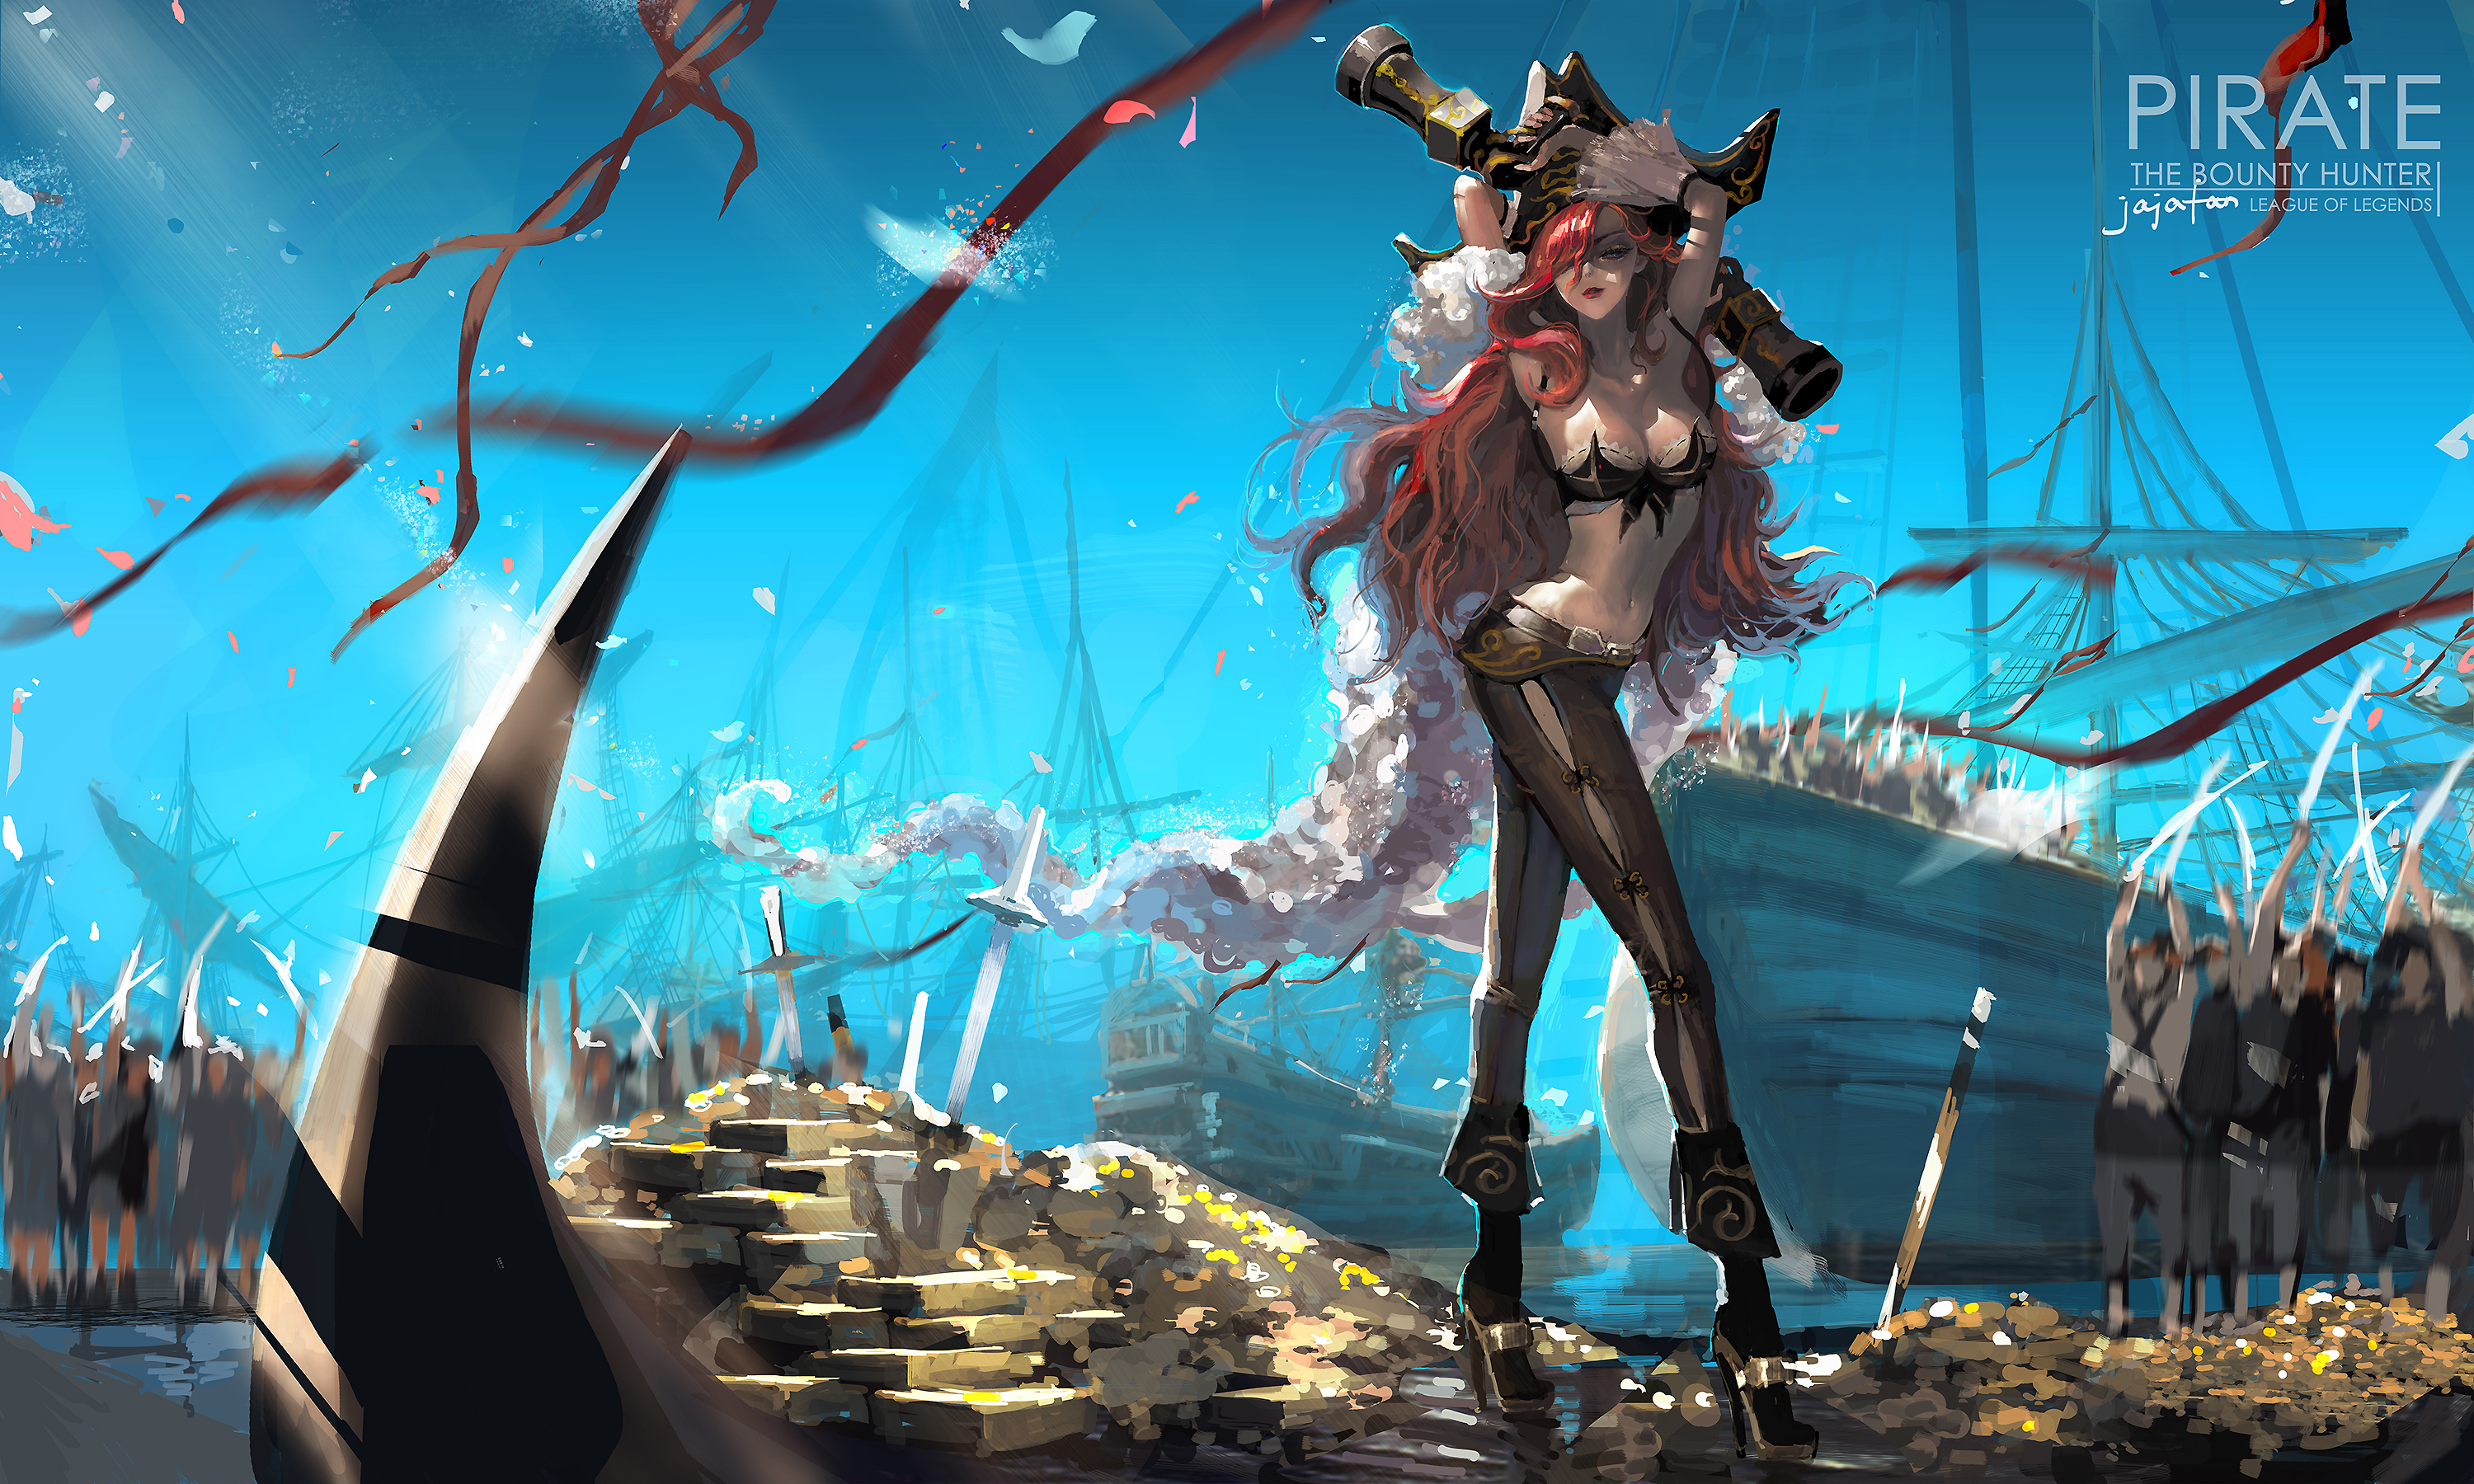 pirate ship, gold, miss fortune (league of legends), video game, league of legends, fantasy, hat, long hair, pirate, red hair, sword, weapon